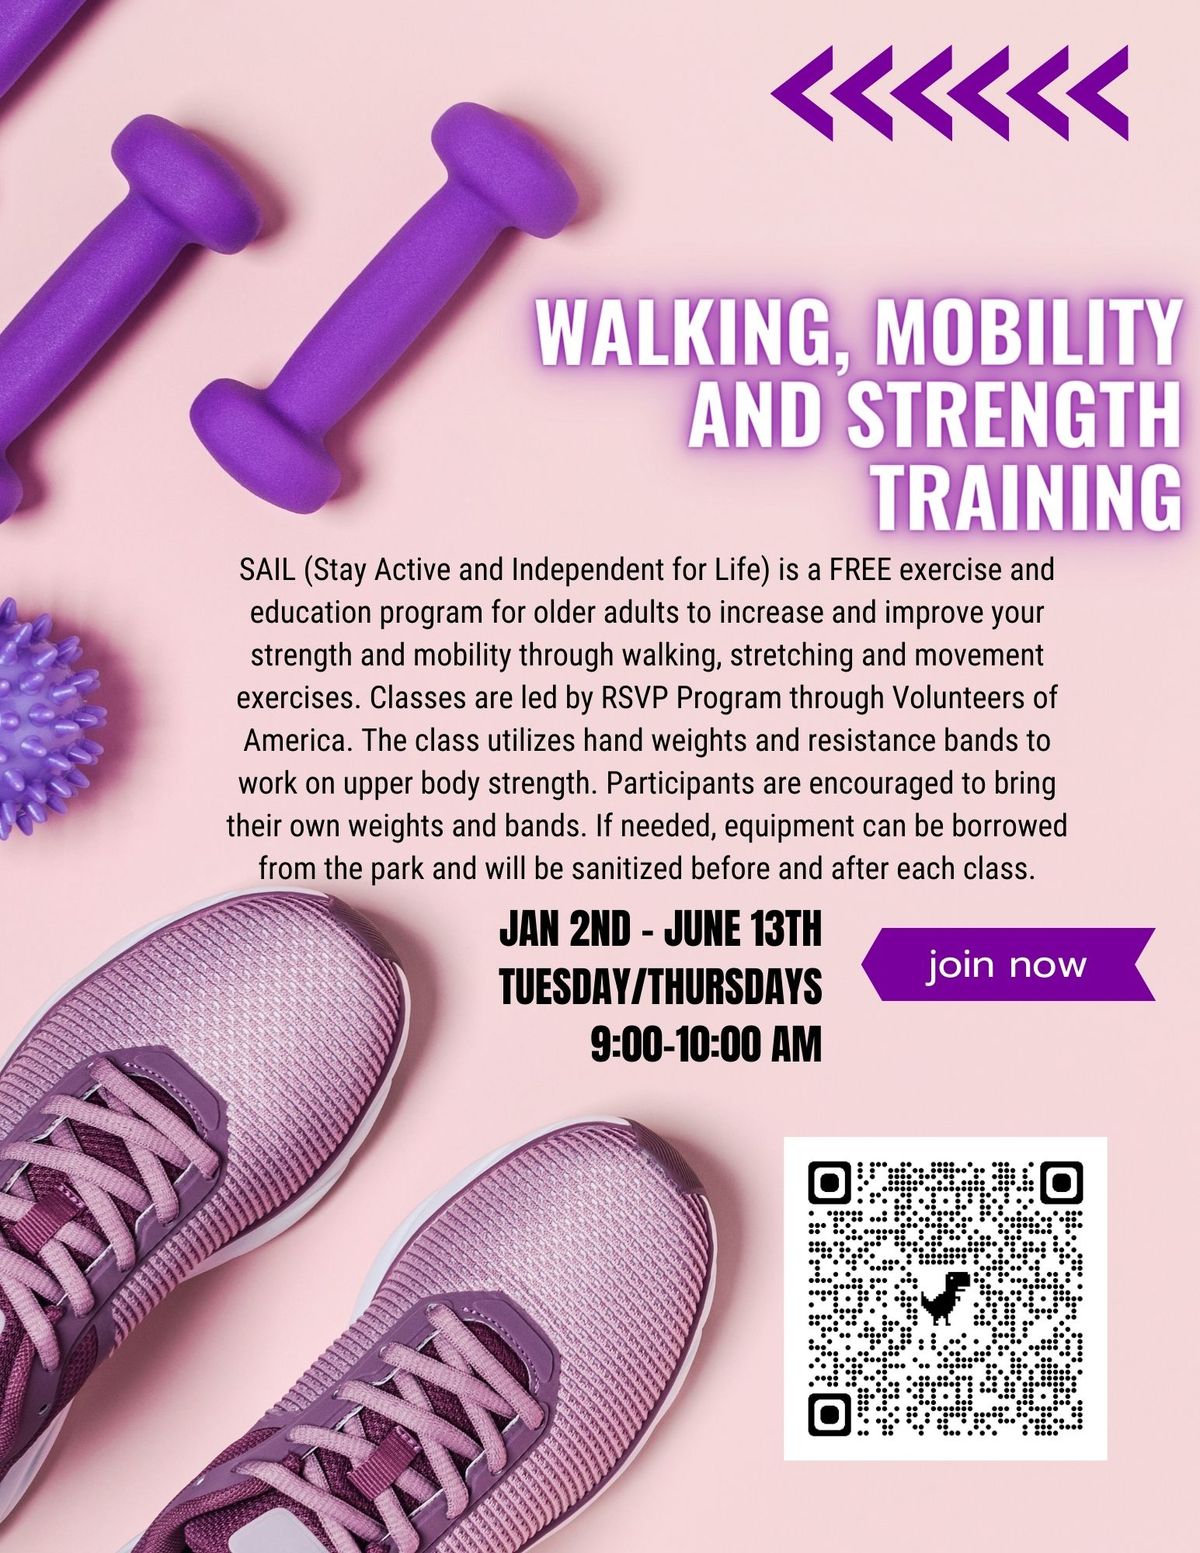 Walking, Mobility and Strength Training